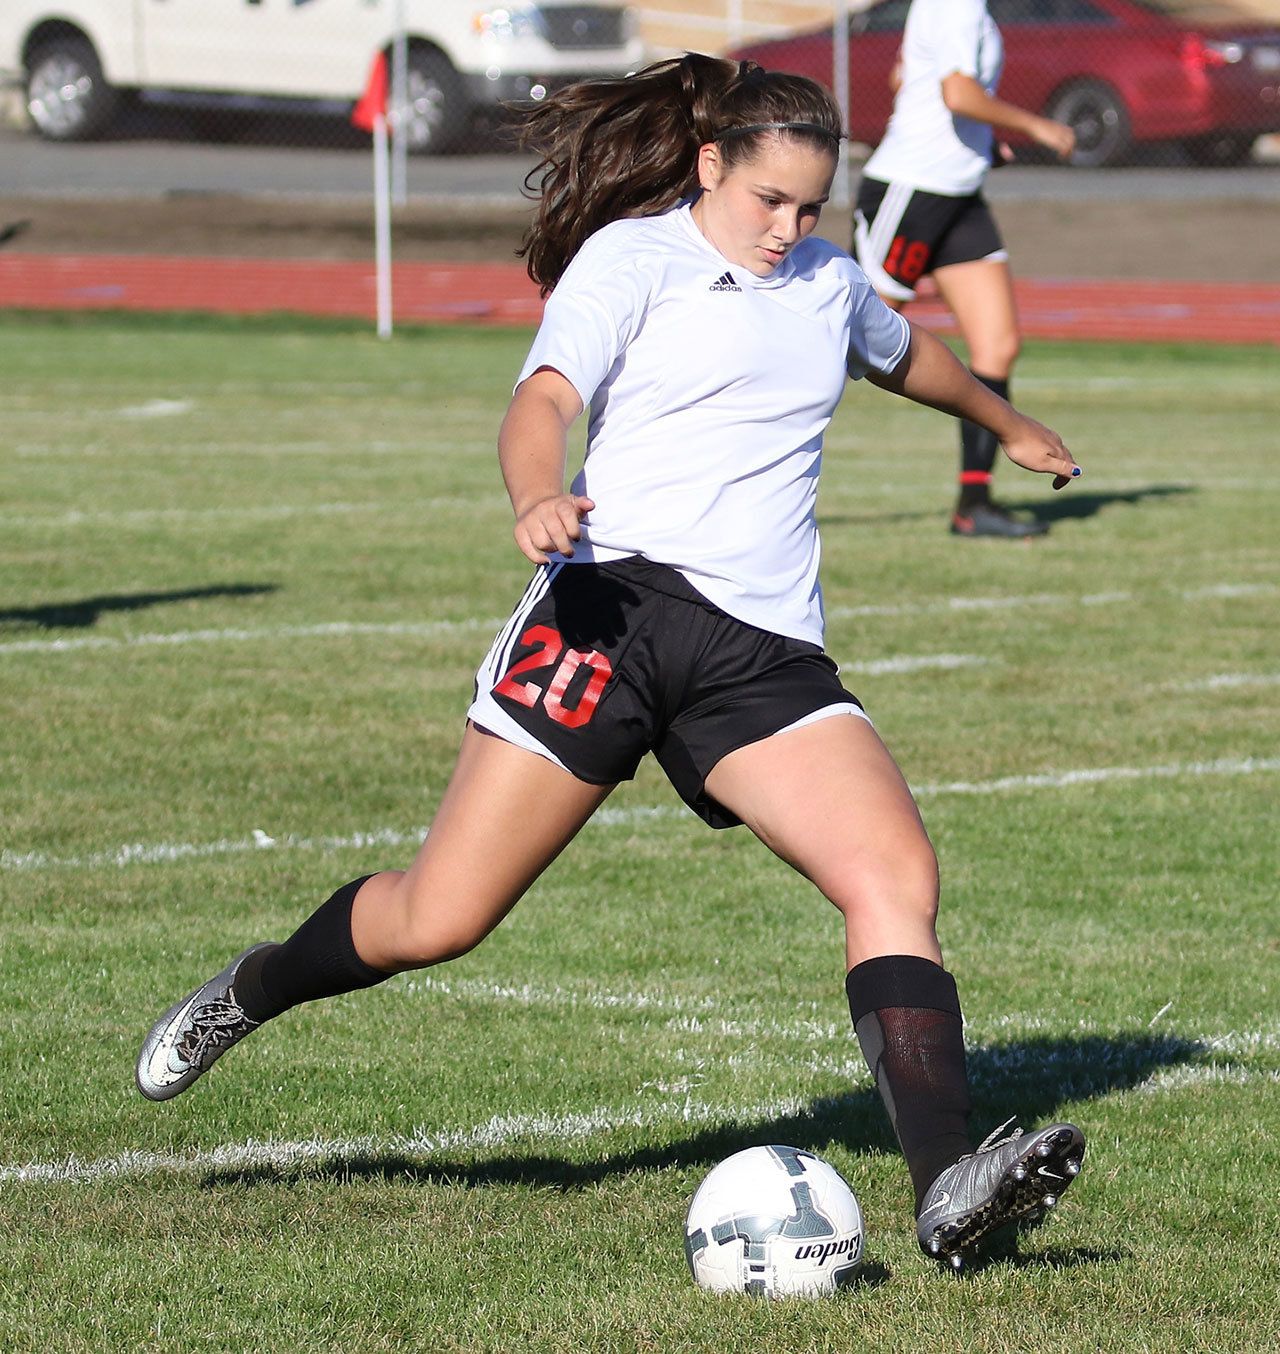 Coupeville’s Mia Littlejohn set a school single season soccer scoring record this fall and was named the Olympic League’s Most Valuable Player. (Photo by John Fisken)